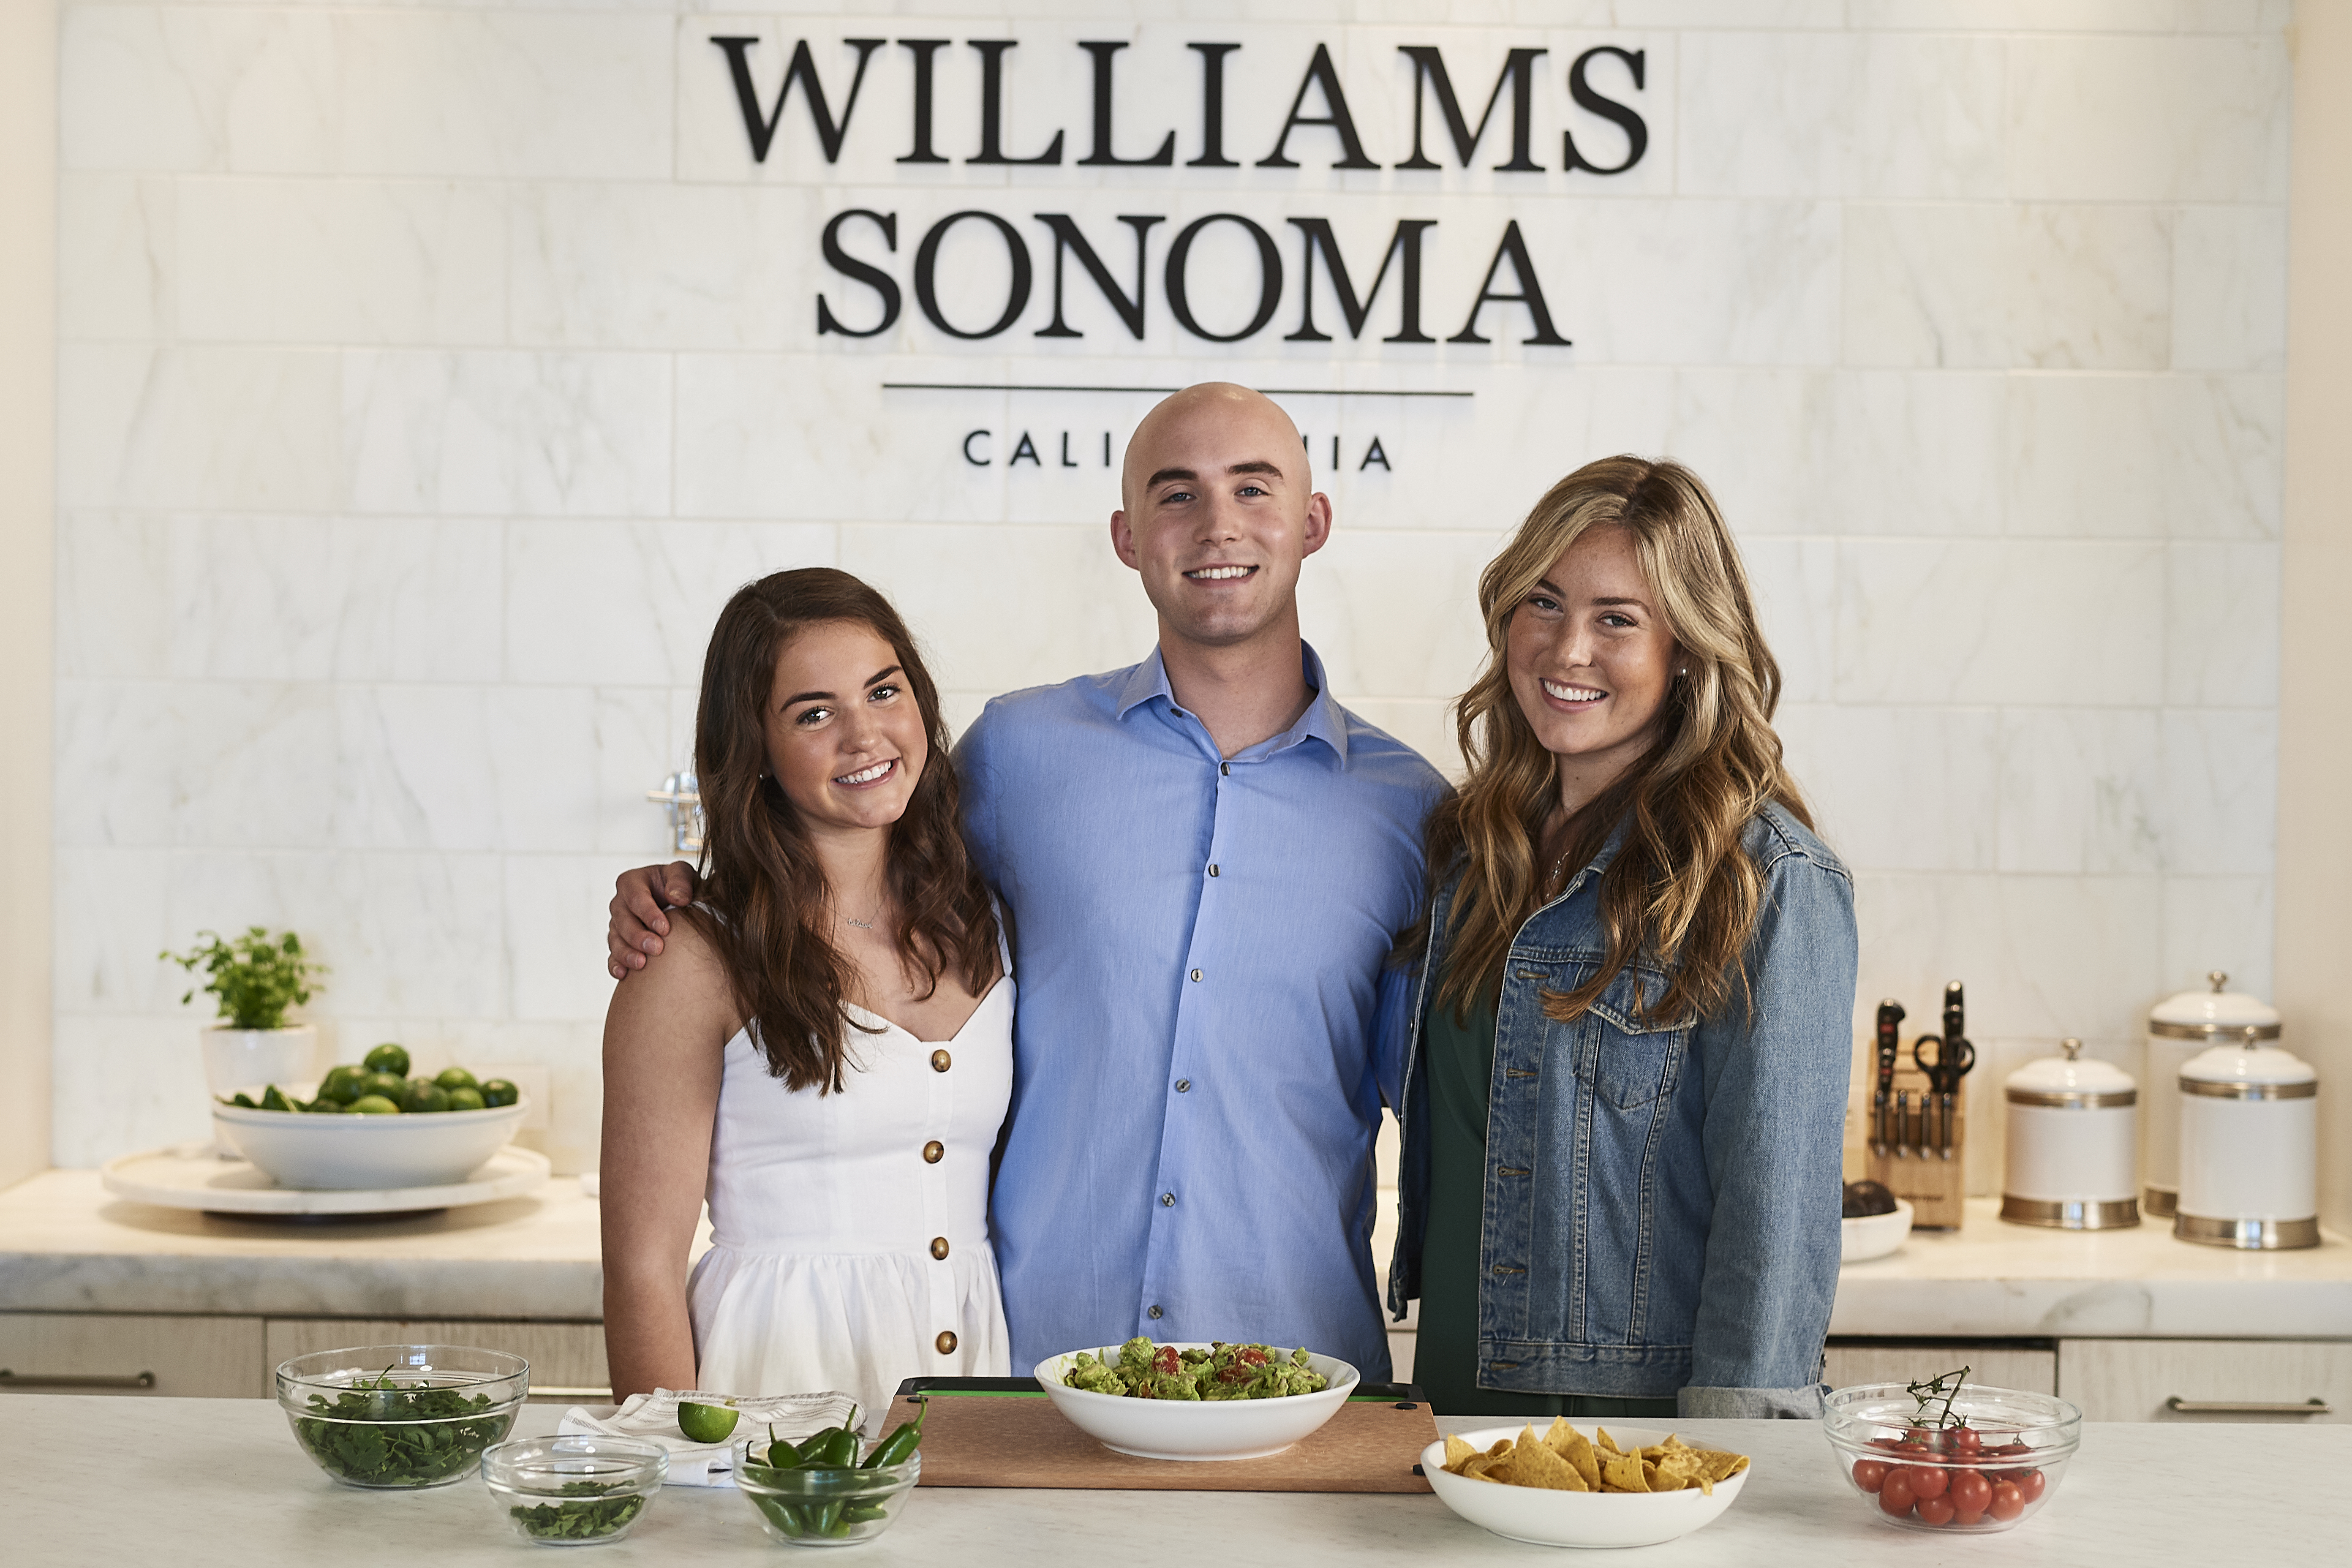 https://mms.businesswire.com/media/20190506005267/en/719905/5/CupBoardPro_as_seen_on_Shark_Tank_Launches_at_Williams_Sonoma.jpg